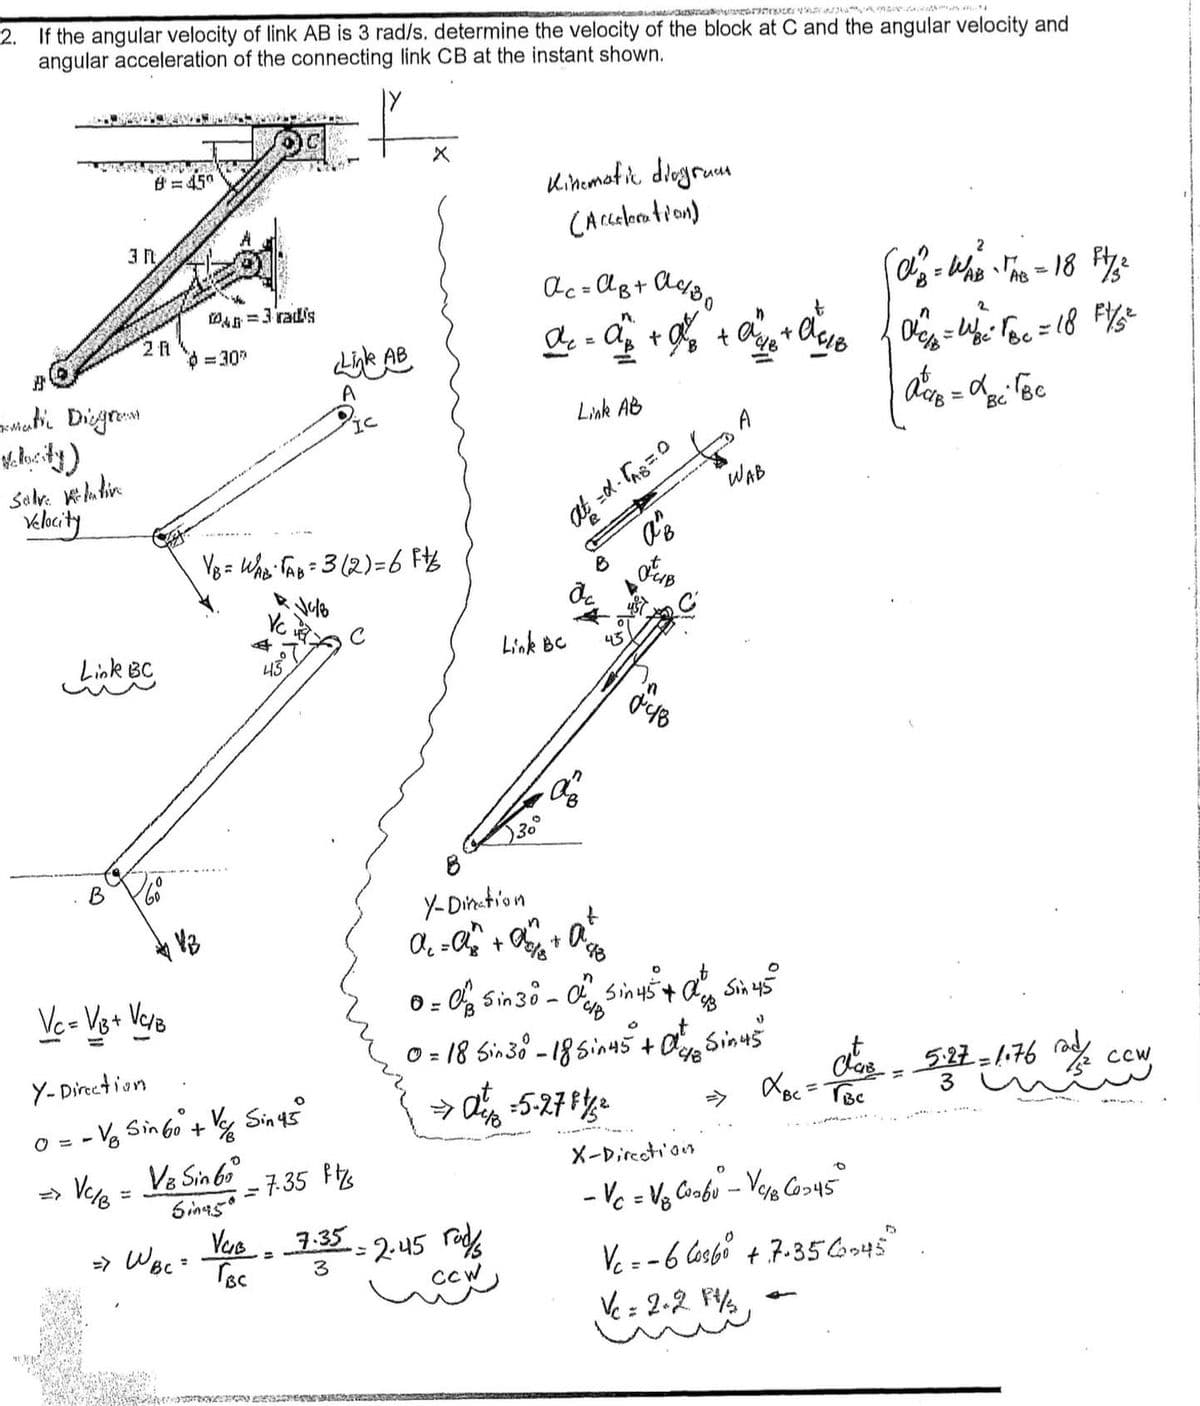 LOS AN
2. If the angular velocity of link AB is 3 rad/s. determine the velocity of the block at C and the angular velocity and
angular acceleration of the connecting link CB at the instant shown.
Ratic Diegram.
Salve relative
Velocity
B
3 n
8=45°
Link BC
2 f
VC/B
-
0
Vc = V/₁3 + VC/B
60
V/B
WA
14=3 radis
=30"
VB = WAB TAB = 3 (2) = 6 Ft/
Vc
4
Y-Direction
0 = -√₂ Sin 60° + V Sin 45°
V8 Sin 60°
Sinasª
4507
= 7.35 F
=> WBC = TBC
Link AB
A
Vas7-35
=
3
IC
= 2.45 rad
CCW
Kinematic diagram
(Acceleration)
30
NERETURNARED SORAGE
n
Ac=AB+ A4/30
A₁ = a + a² + ave
,
Link BC
Link AB
at=d. [AB=0
8
ac
de
Y-Dination
n
t
A₁ = a^² + 4/8 + A²4/2
AB
▷
отив
048
n
0 = 0 Sin 30 - O Sin 45+ ang sin 45°
CIB
0 = 18 Sin 30° - 18 Sin 45 + 0 Sinus
→ at = 5-27 11/²
WAB
t
+0$18
X-Direction
O
- Vc = V8 Coabu - V₁/8 C0-45°
2
A² = WAB TAB = 18 F1 /₂²
Vc = -6 Cos6⁰ + 7-35 C-45
Vc = 2-2 Ft/₂
n
0₁/=
|dis = dpi Toe
'BC
Bc
2.
=W₁²² √ Bc = 18 F 1/5²2
Cla₁8 5.27 = 1.76 a 2 cew
XBC = TBC
S
H